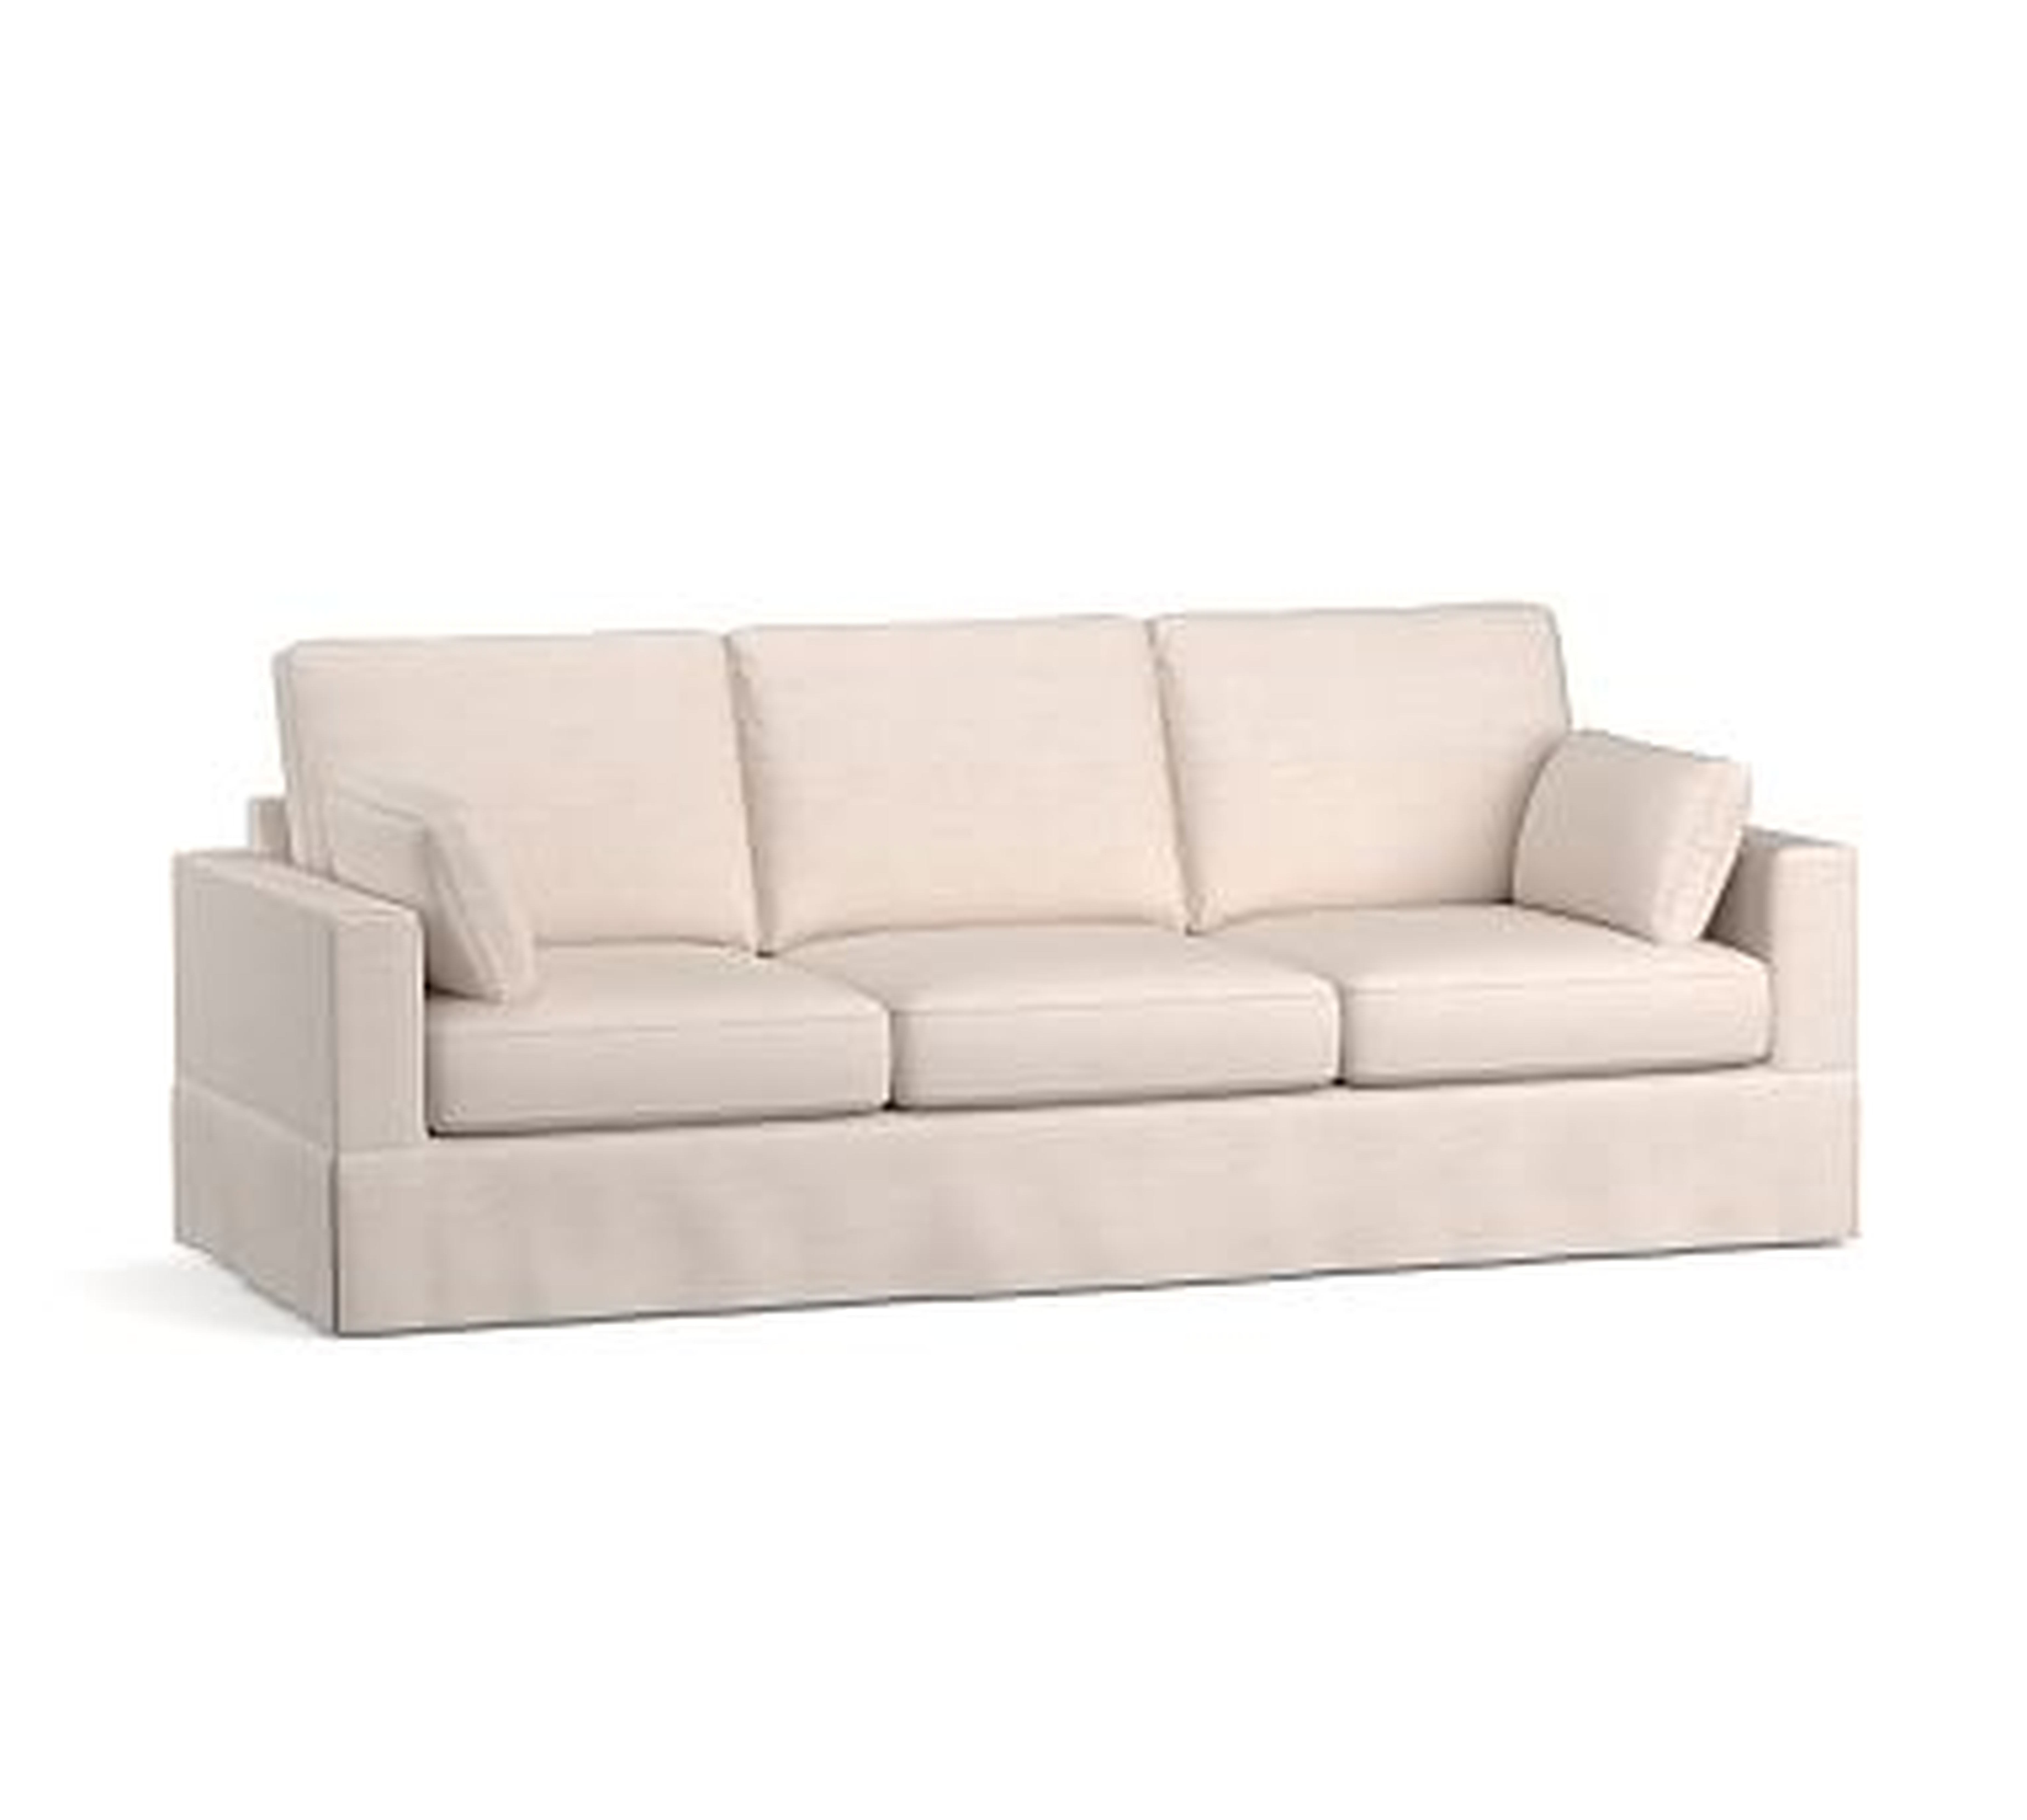 Jenner Square Arm Slipcovered Grand Sofa, Down Blend Wrapped Cushions, Heathered Twill Stone - Pottery Barn